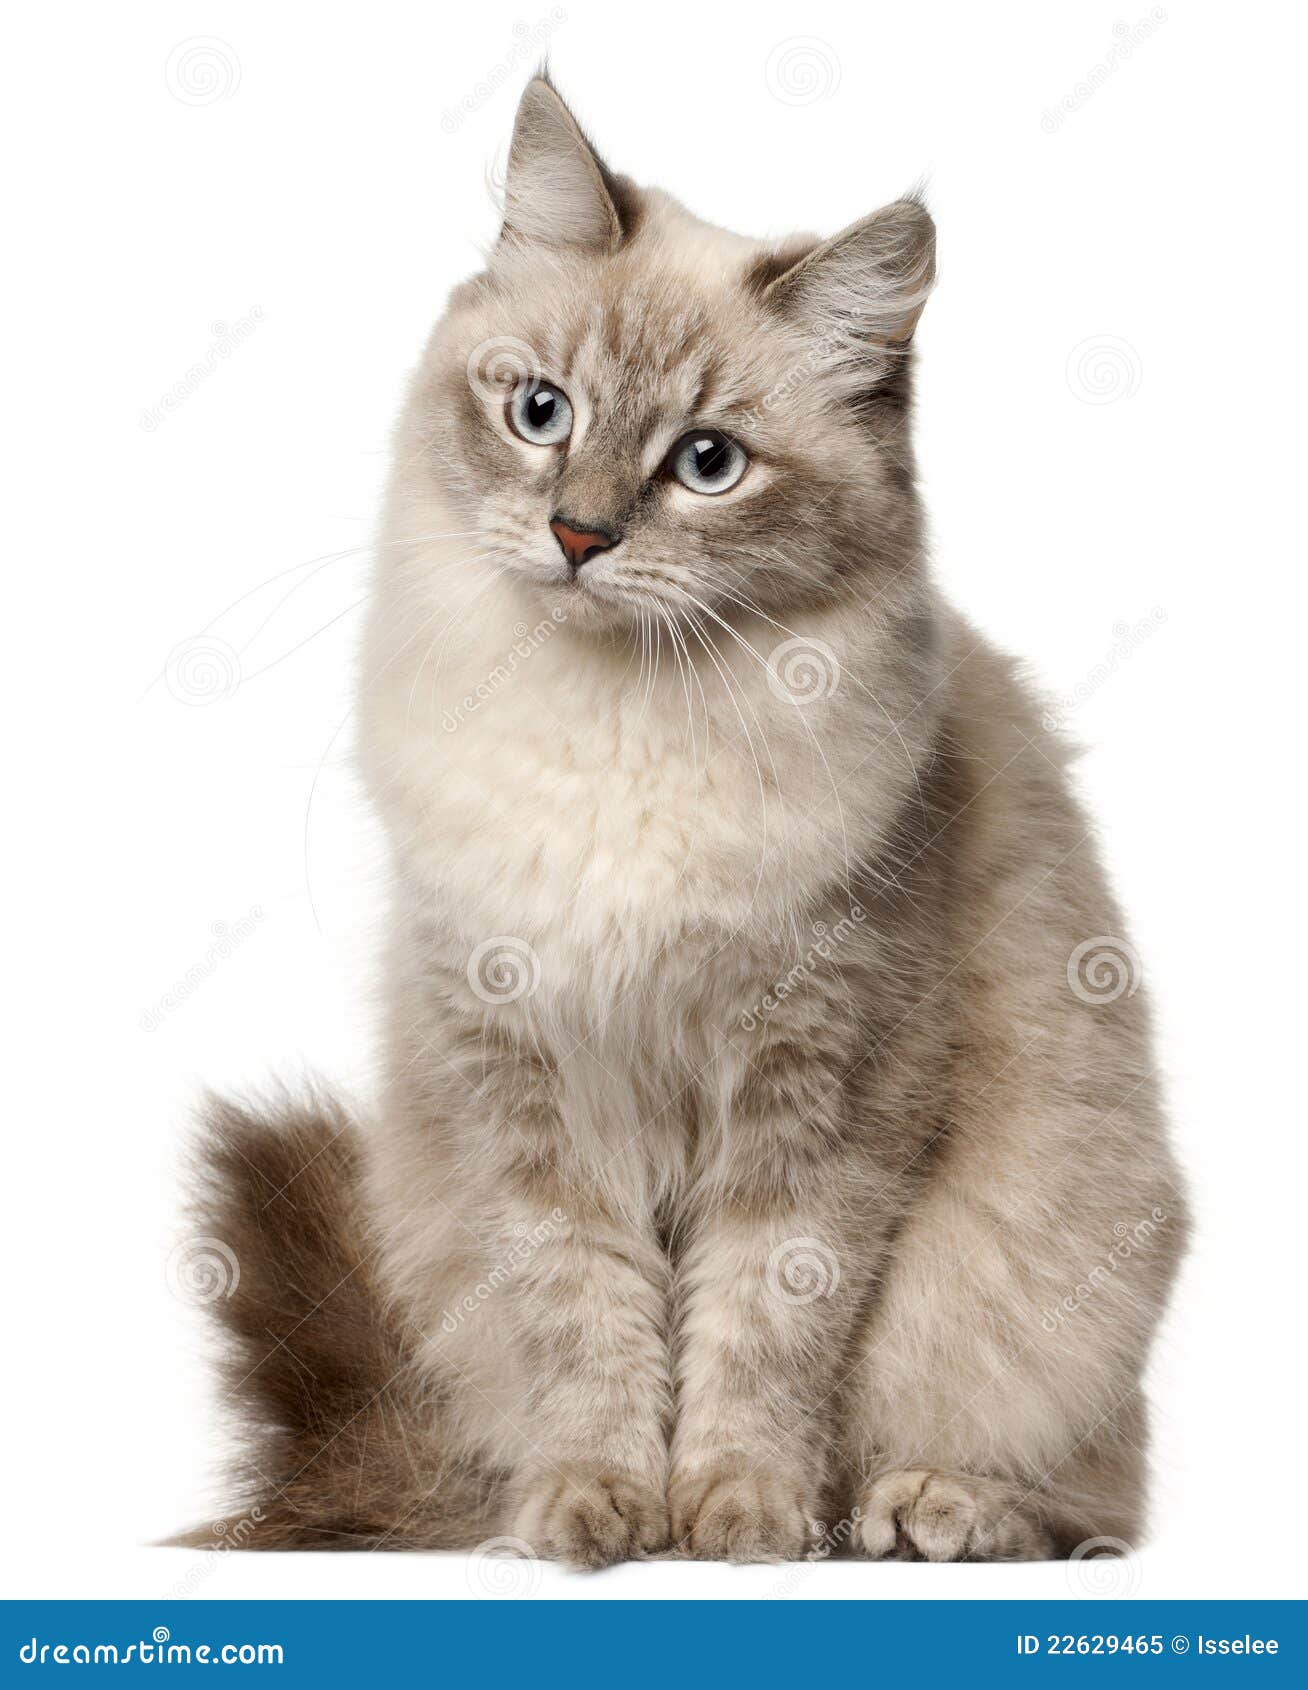 siberian cat, sitting in front of white background